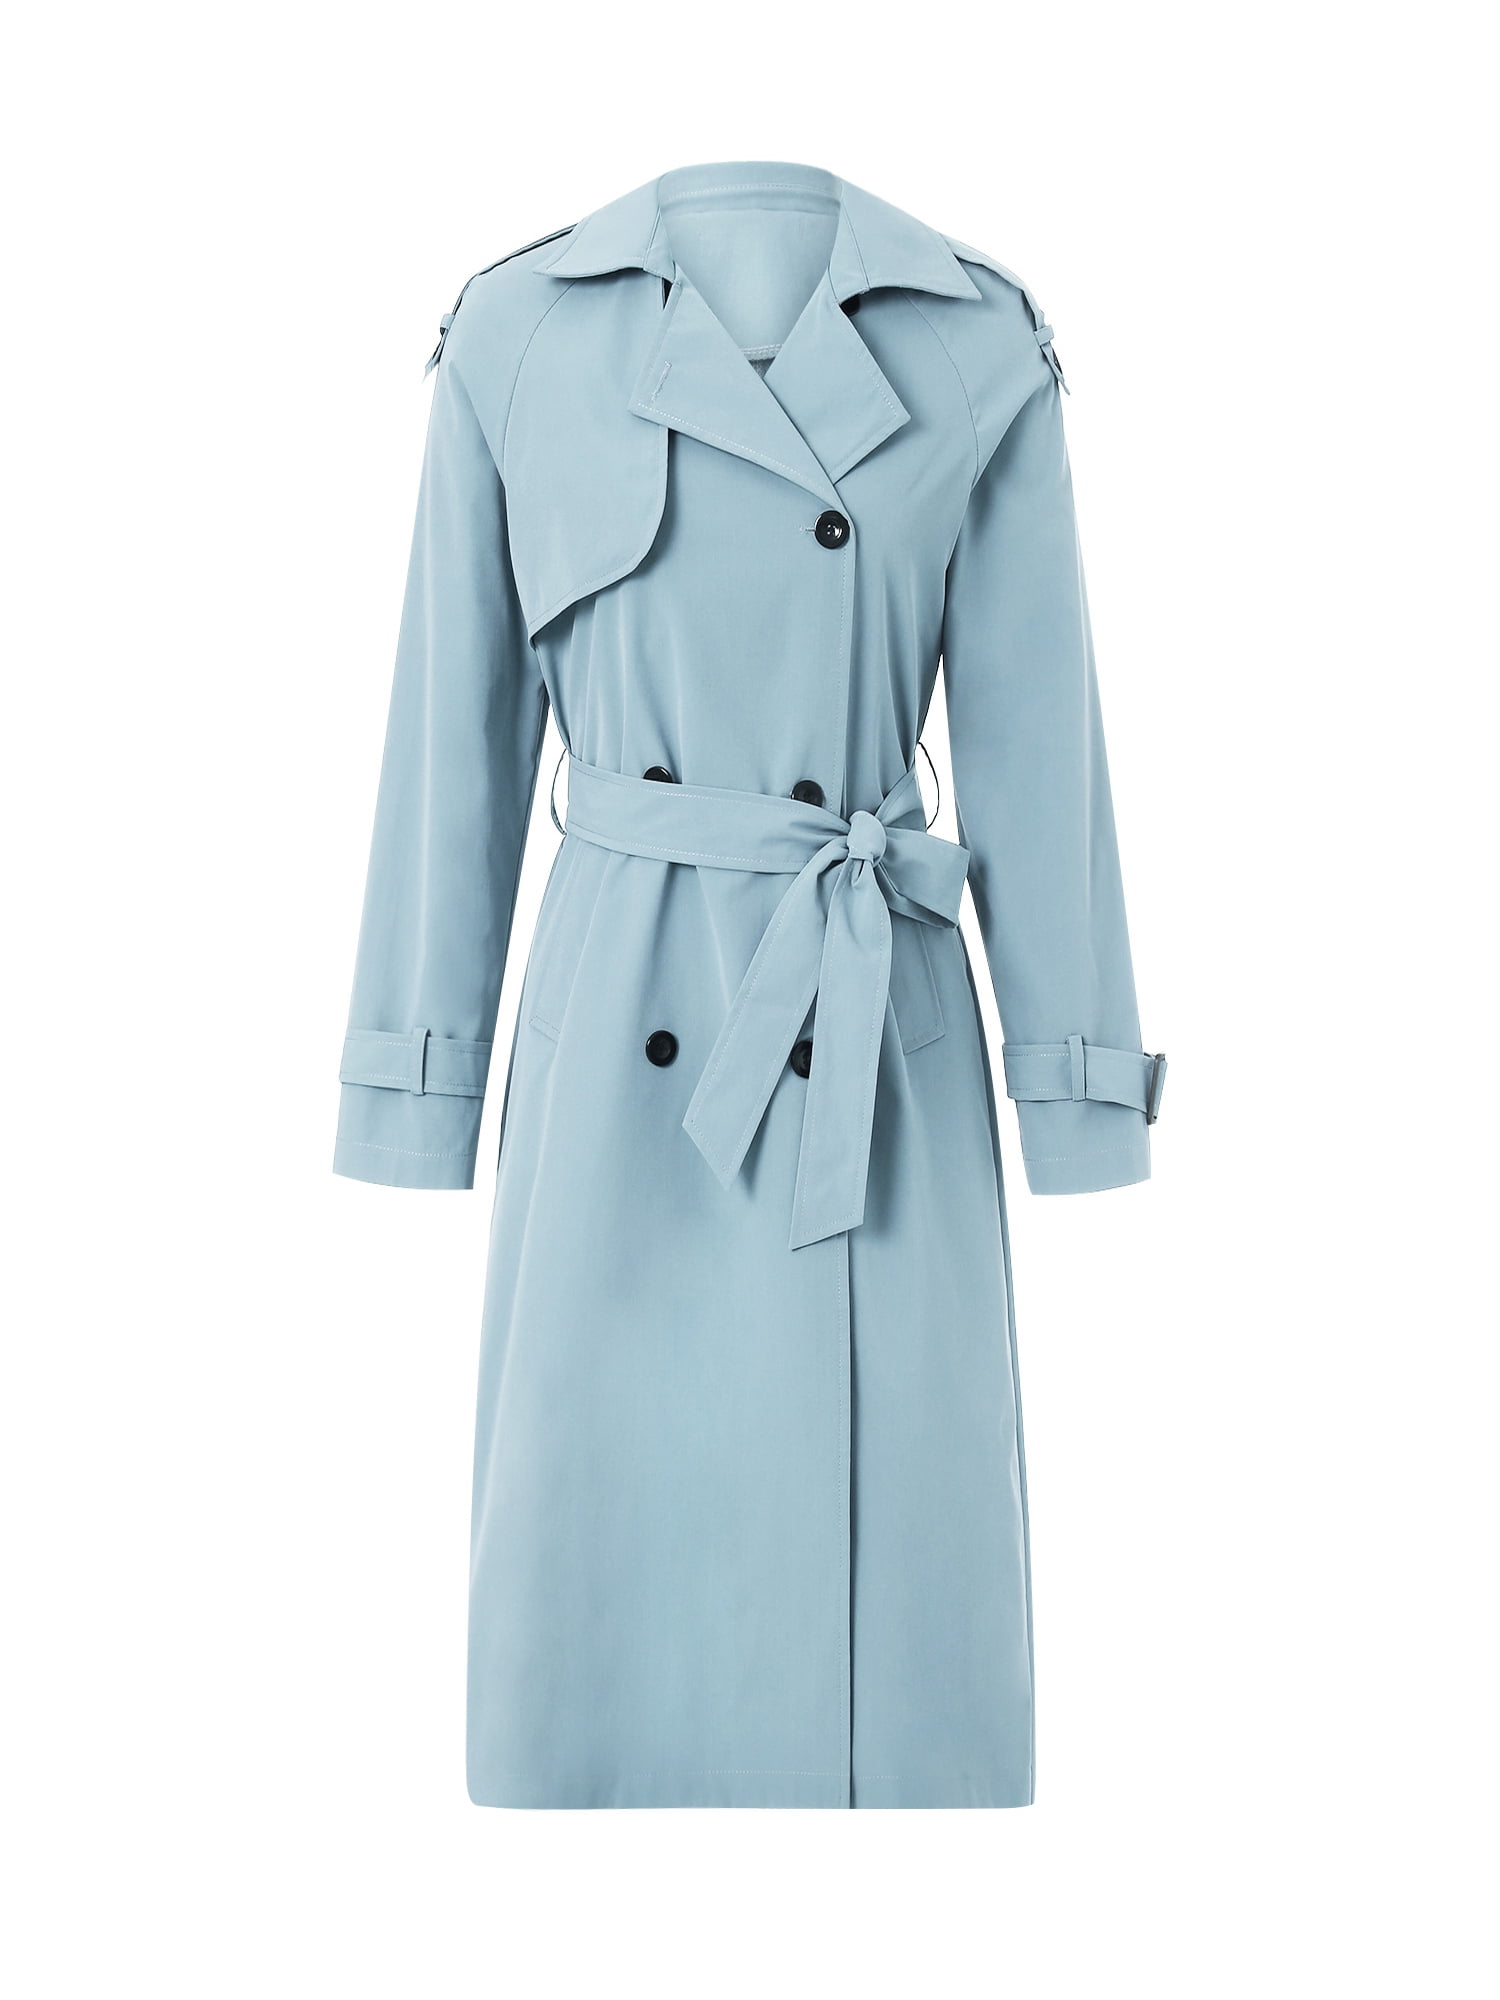 Women Long Sleeve Trench Coat Double Breasted Turndown Collar Long Coats  Classic Autumn Spring Jacket Windproof Outwear